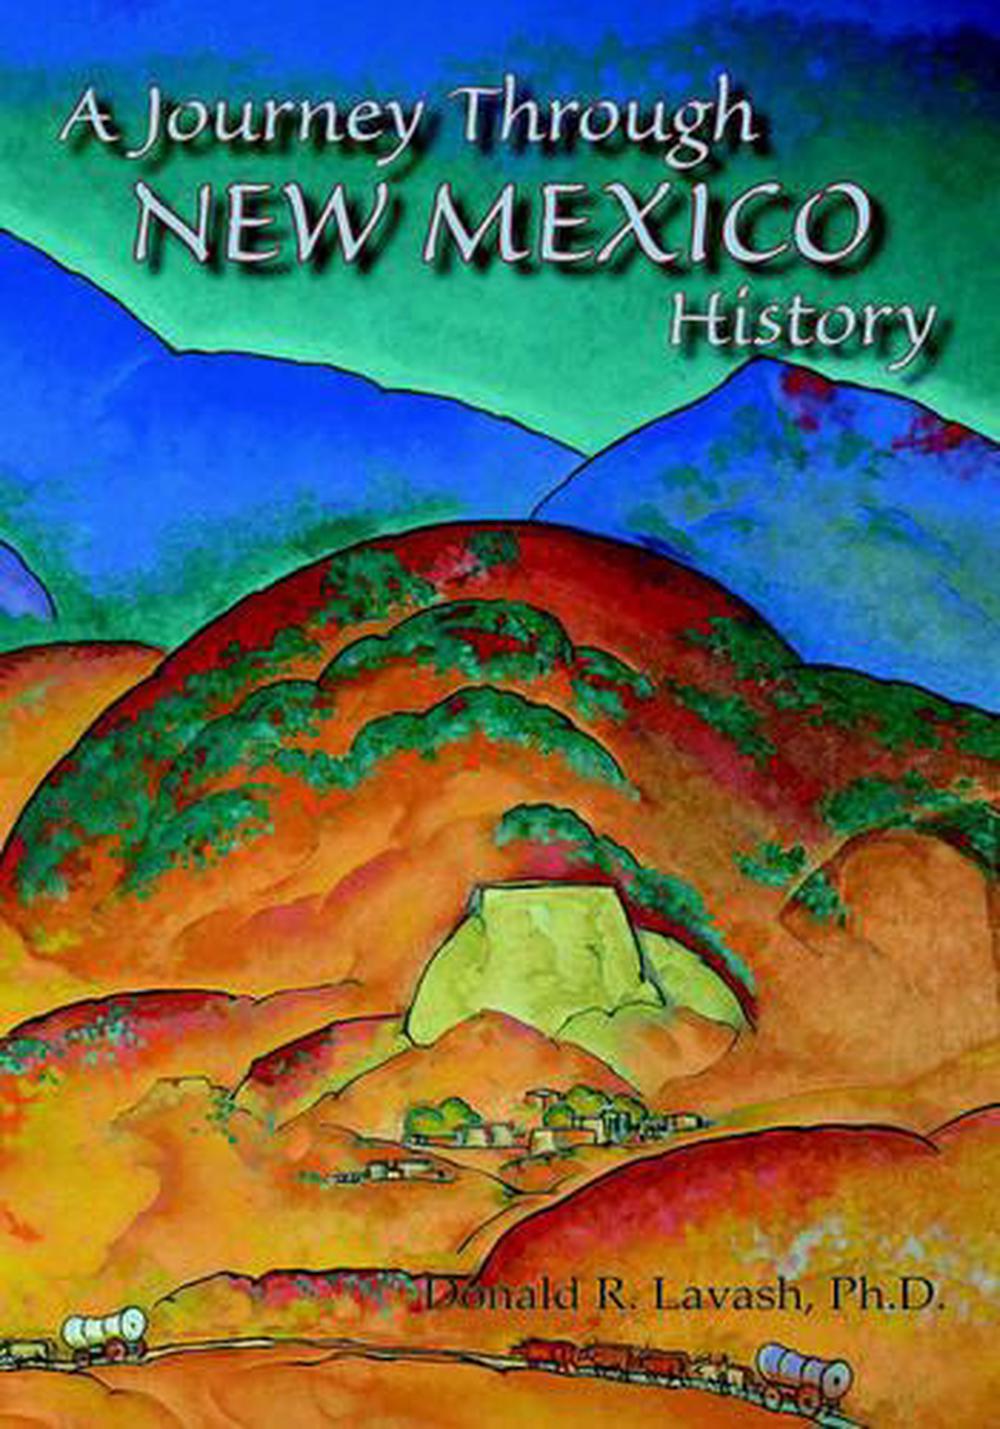 the new mexico journey